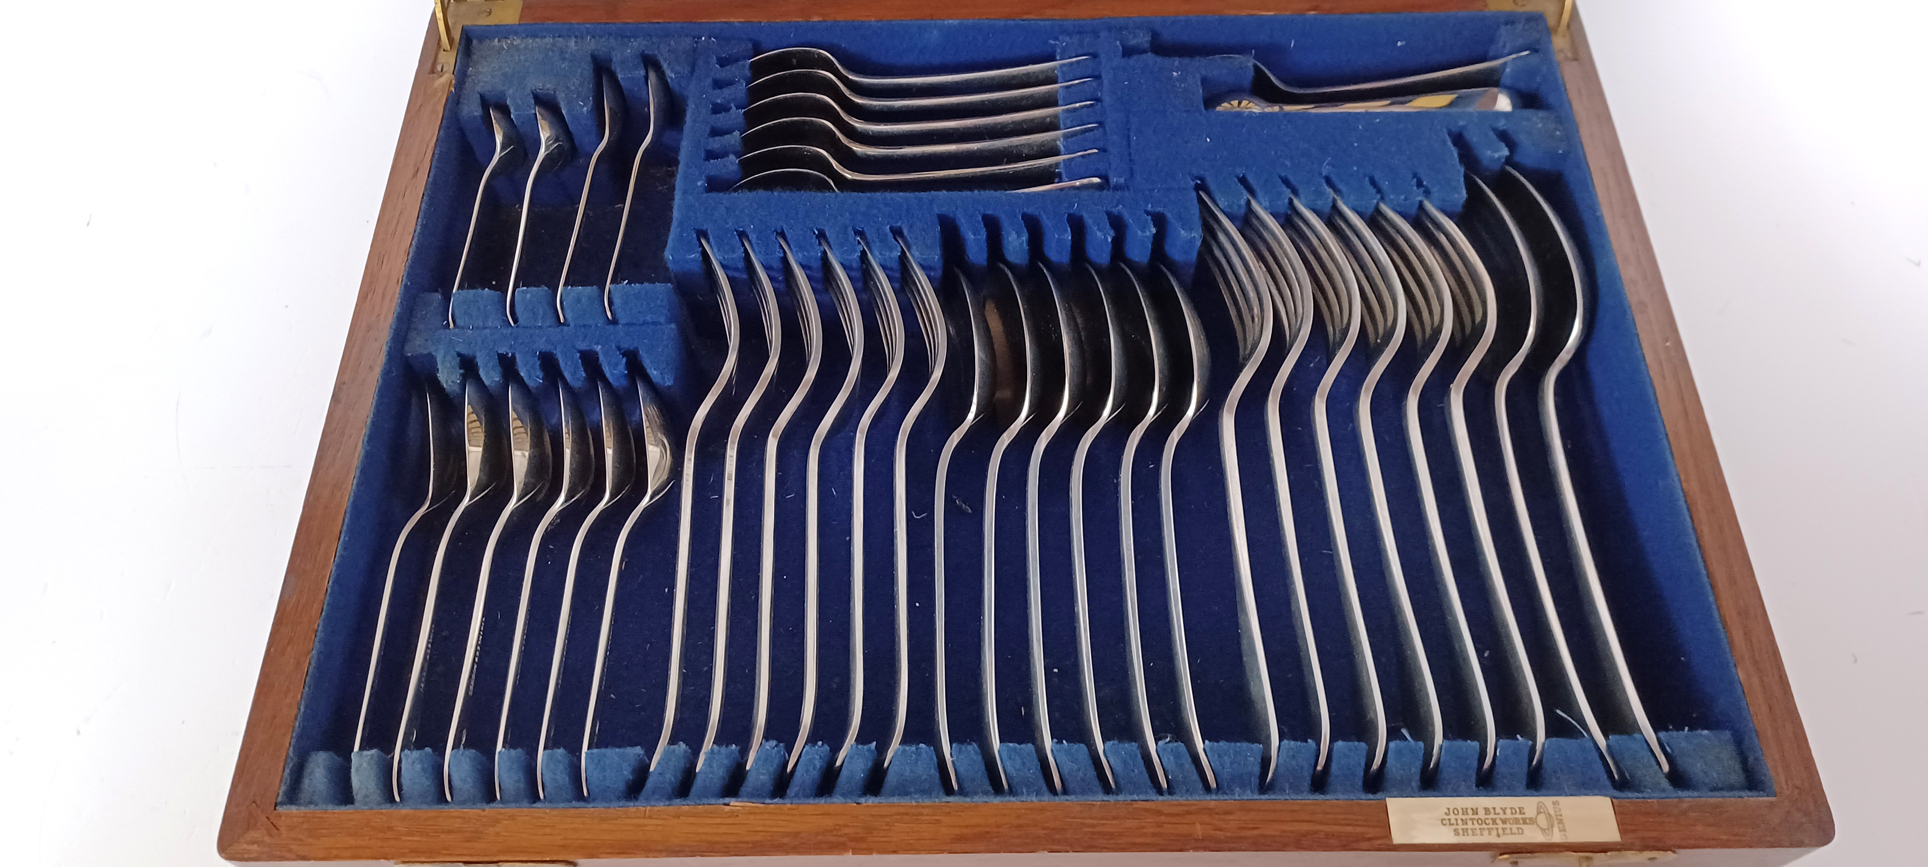 JOHN BLYDE CLINTOCK WORKS SHEFFIELD STAINLESS 50 PIECES GOOD QUALITY CUTLERY SET IN OAK CASE - Image 2 of 3